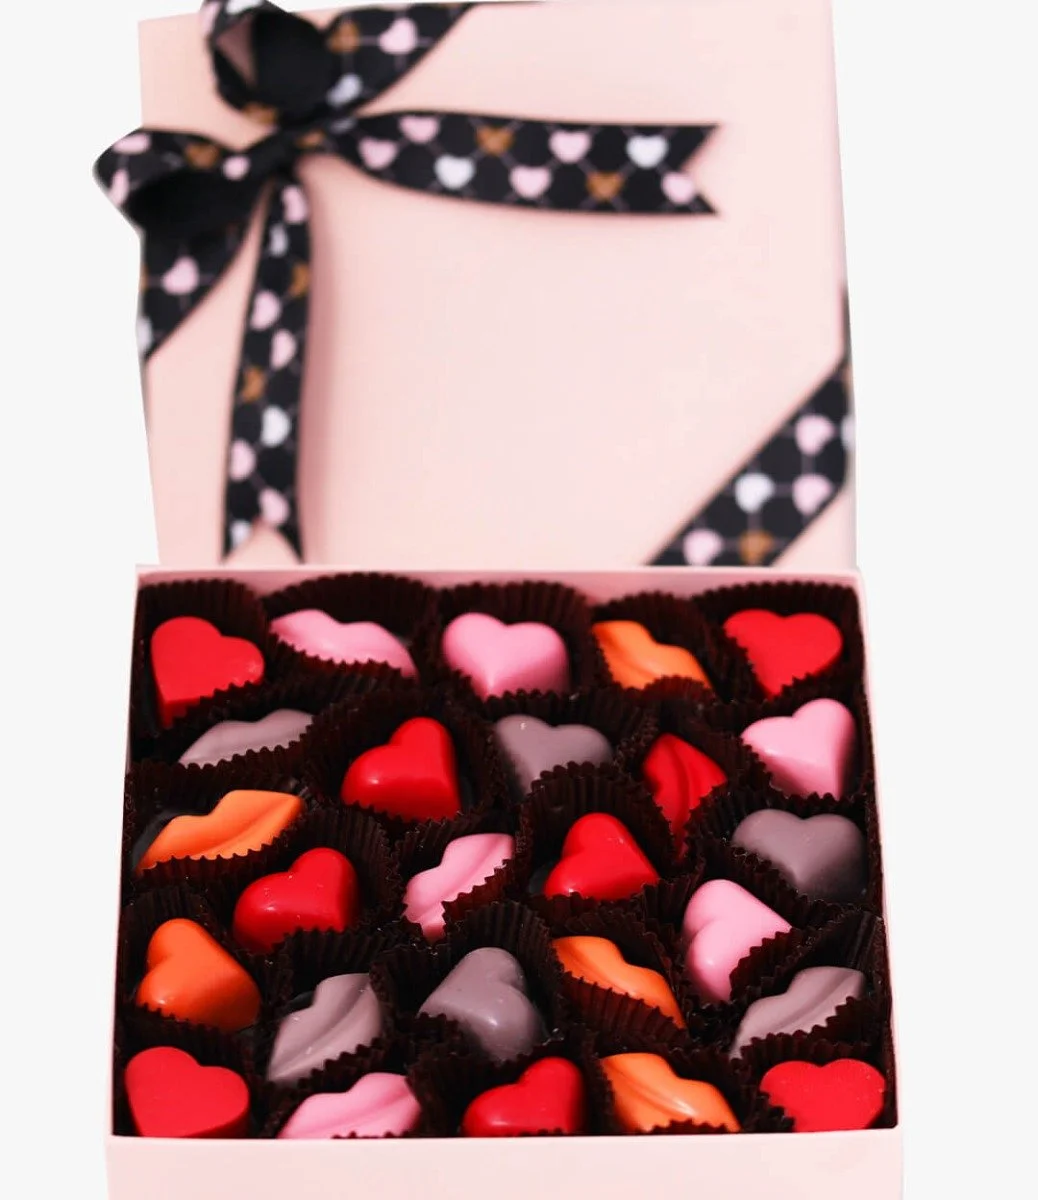 Colors of Valentine's Chocolate Box by NJD